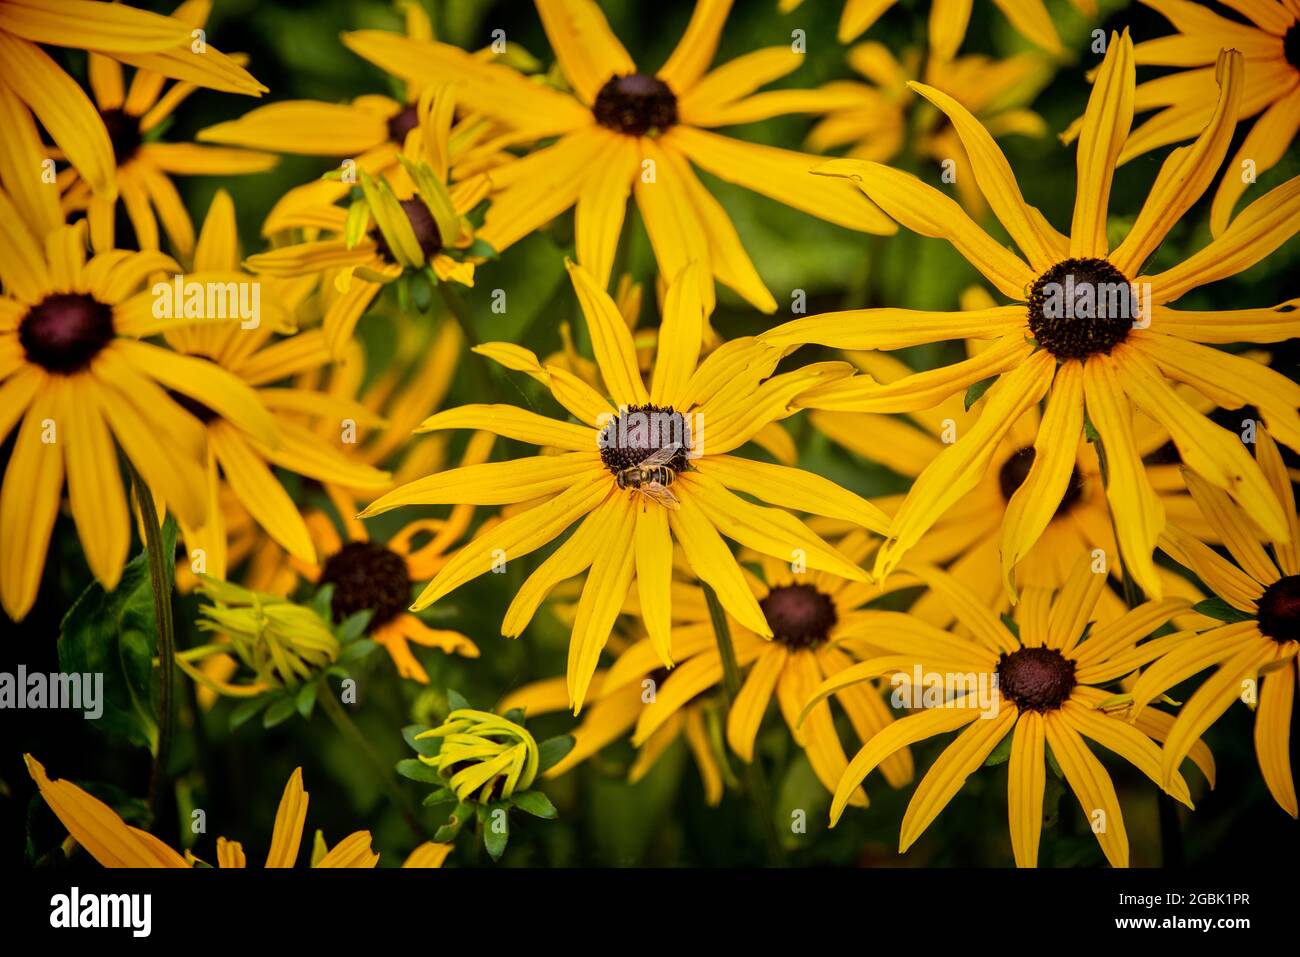 Garden of Golden Daisy Flowers with a bee pollinating Stock Photo